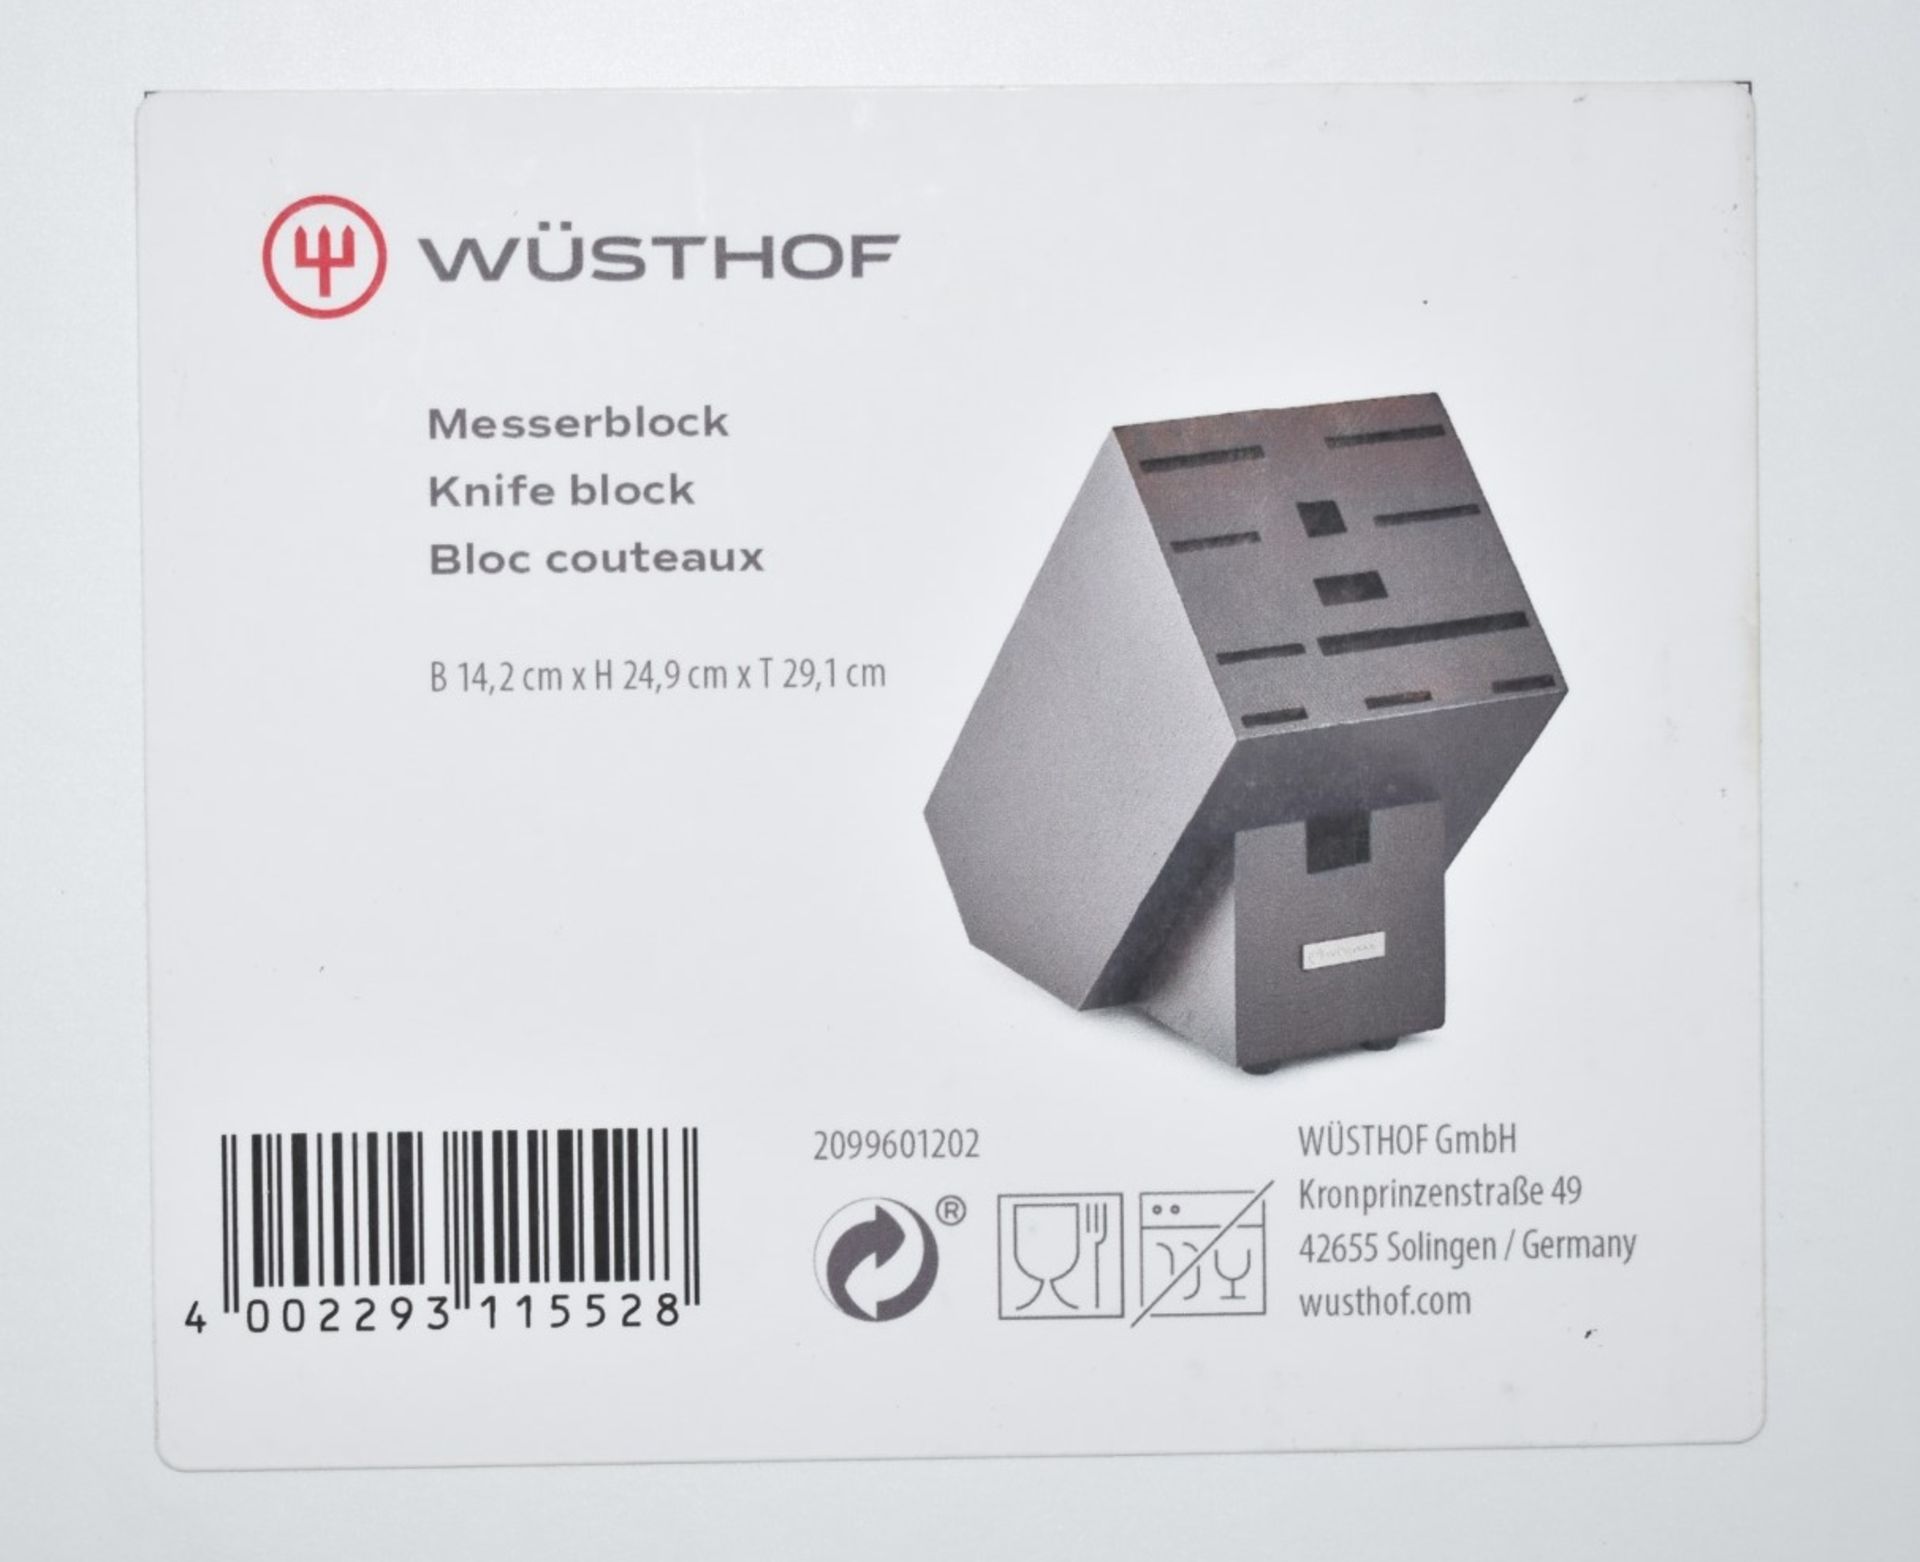 1 x WUSTHOF 12-slot Knife Block In High Quality Ash Wood - Original Price £234.00 - Boxed Stock - Image 8 of 11